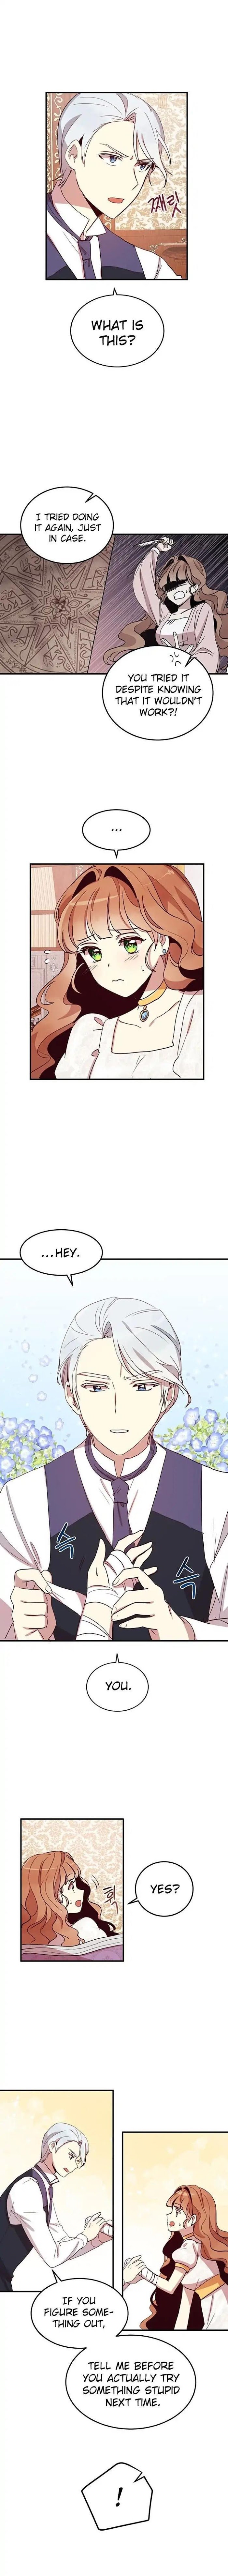 Why Are You Doing This, My Duke!? Webtoon - chapter 12 - #4